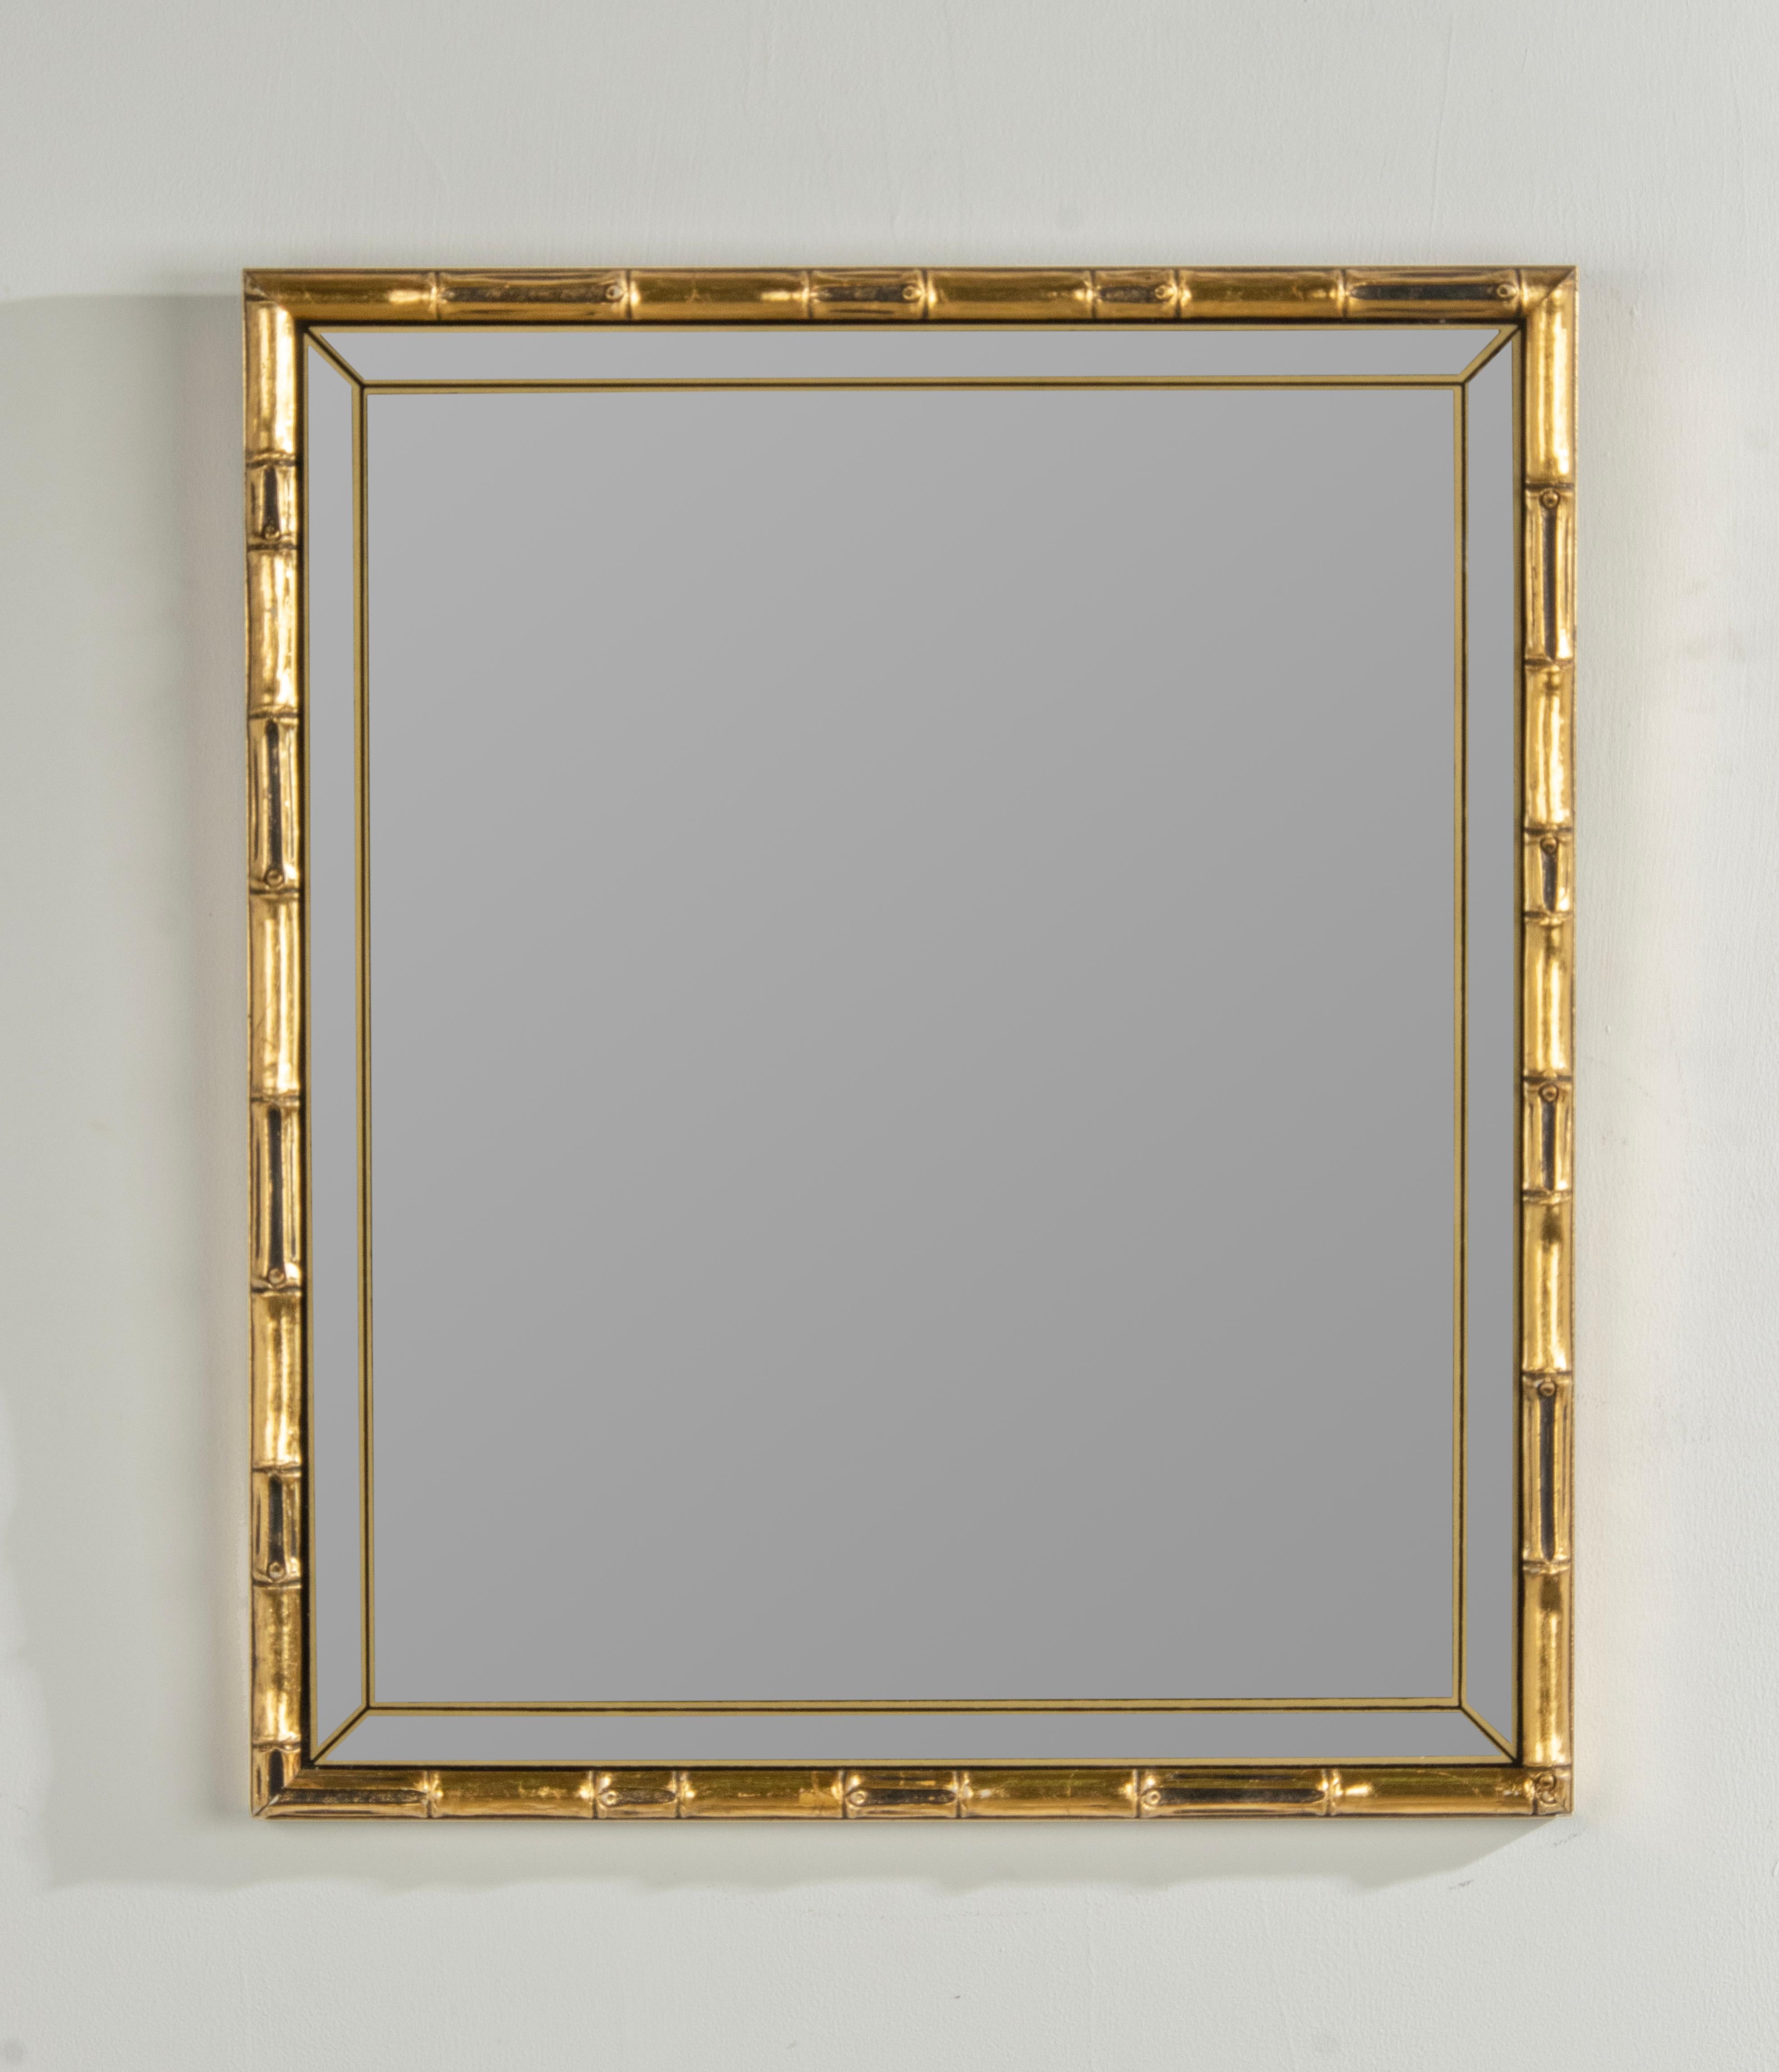 English Mid-Century Modern Gilt Faux Bamboo Wall Mirror by Braddell England For Sale